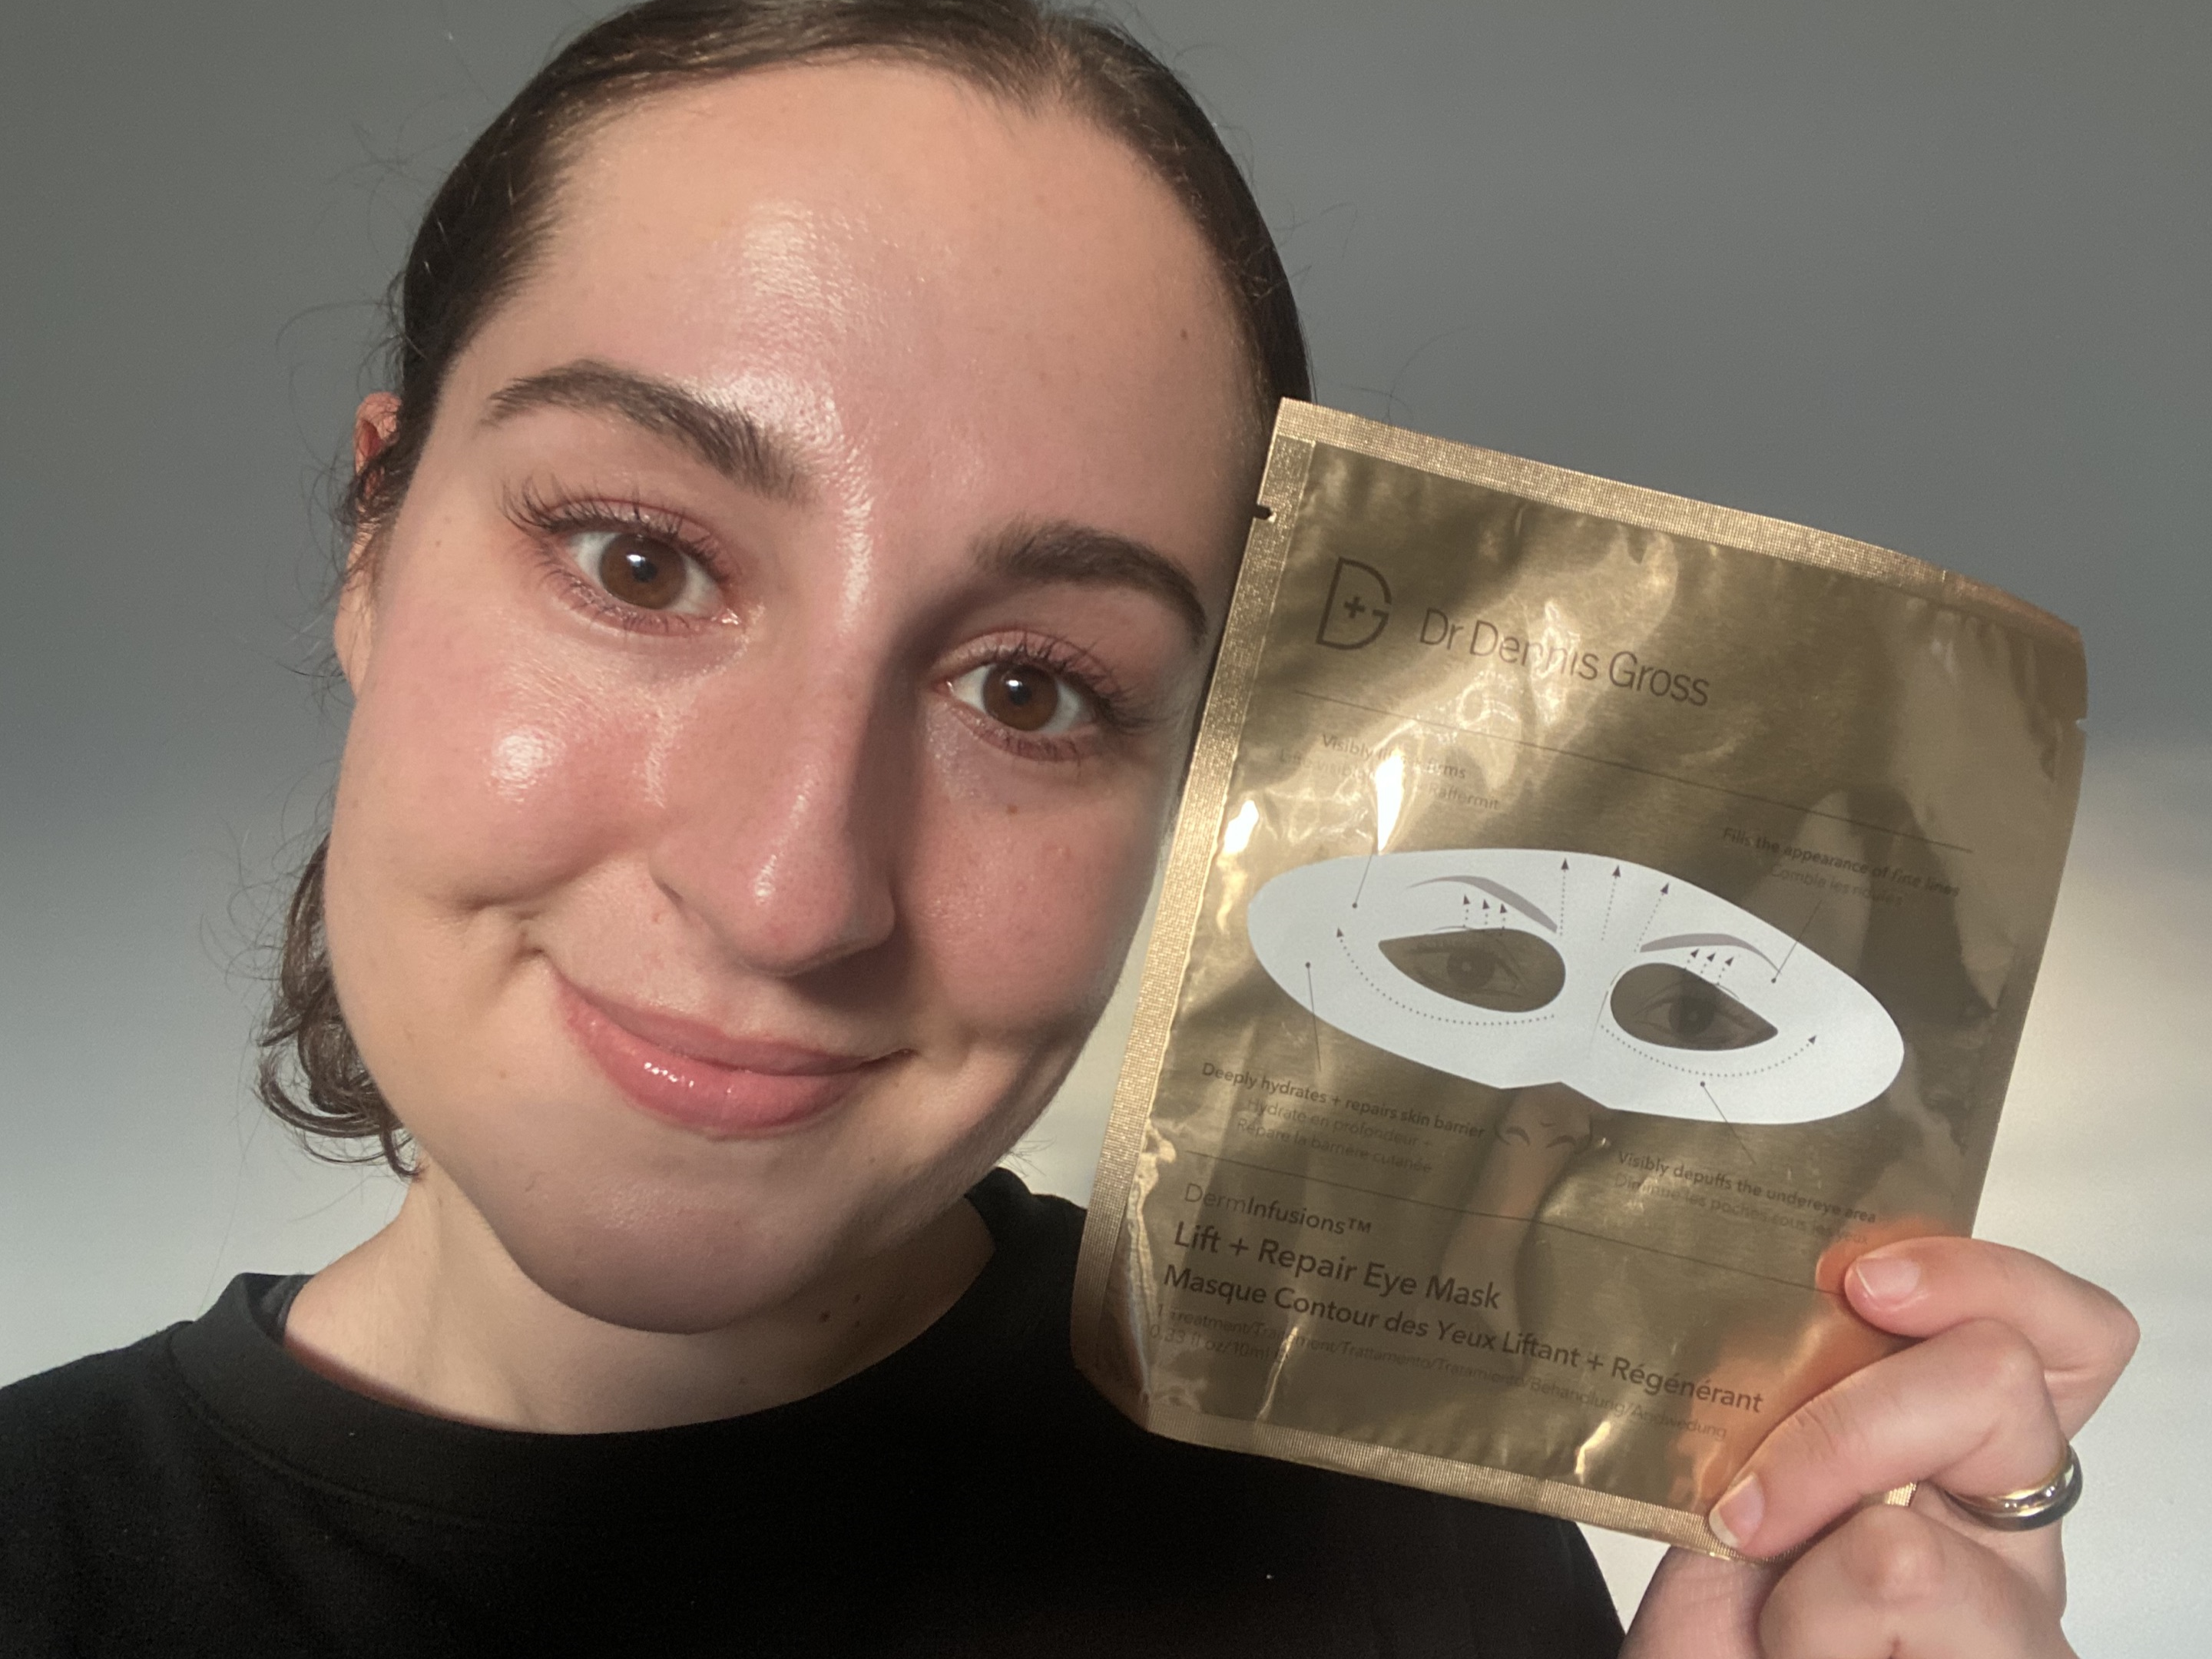 Dr Dennis Gross DermInfusions Eye Mask review | Space NK